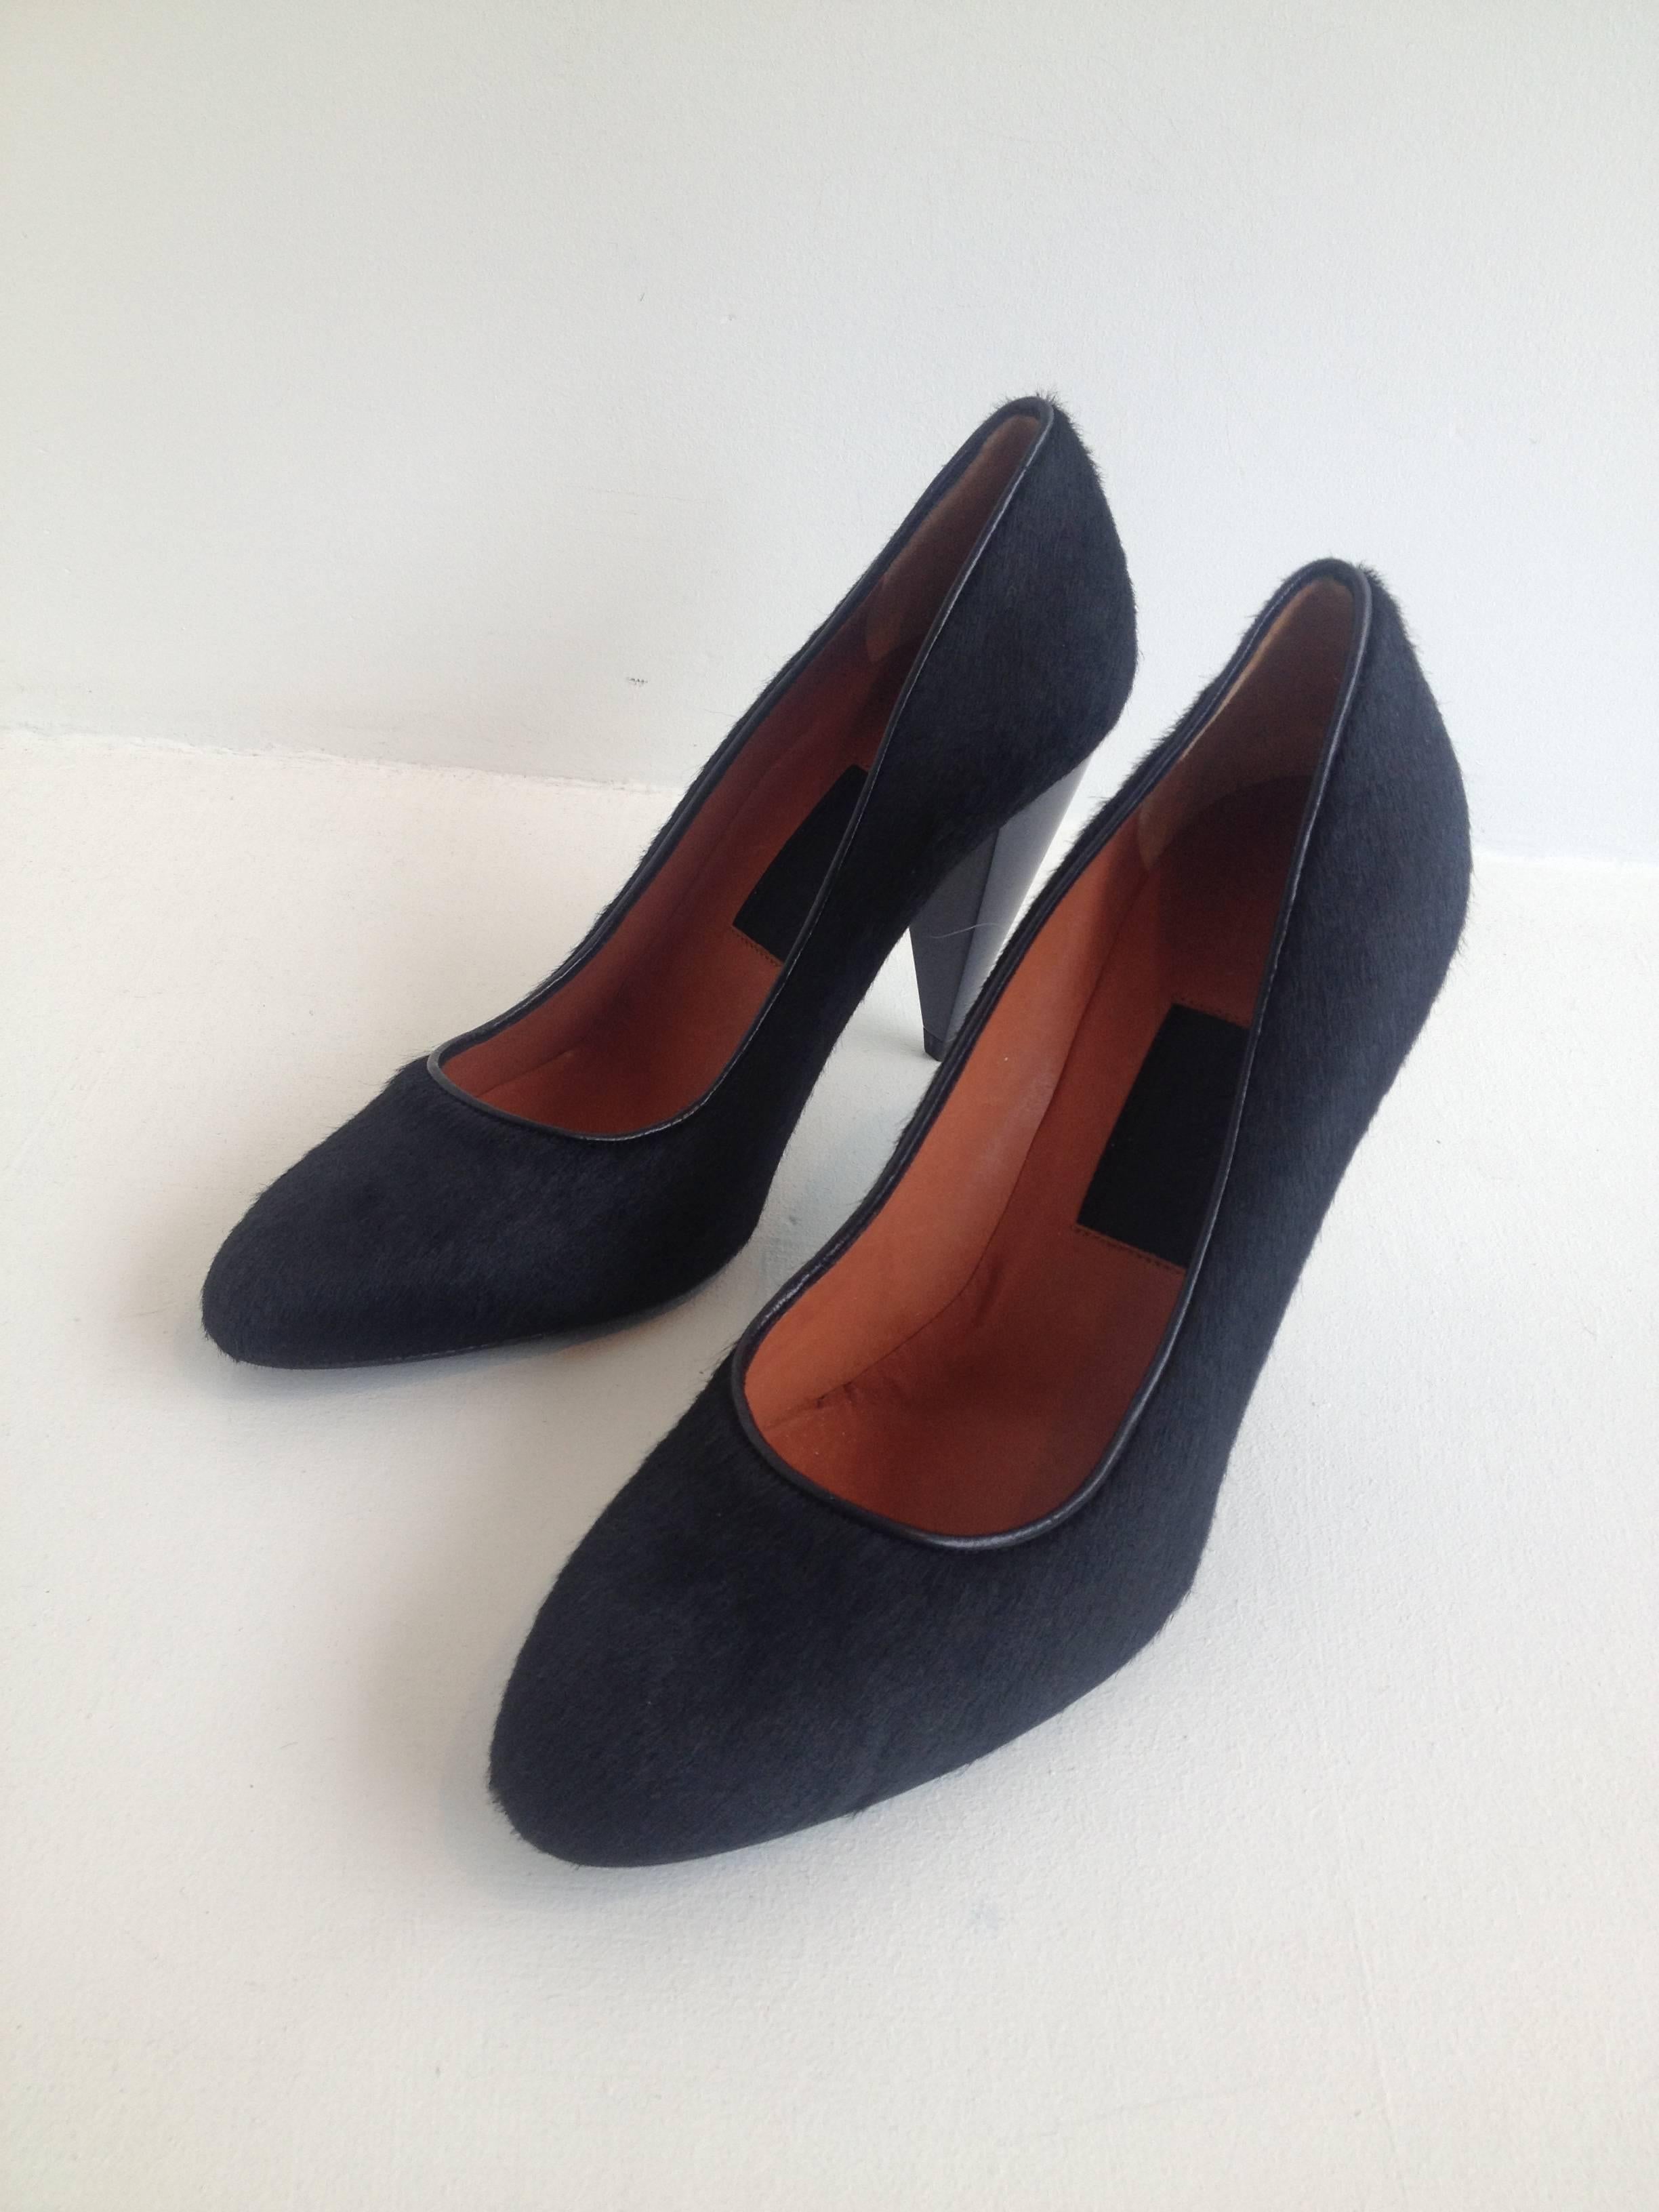 Lanvin Black Ponyhair Pumps In New Condition For Sale In San Francisco, CA